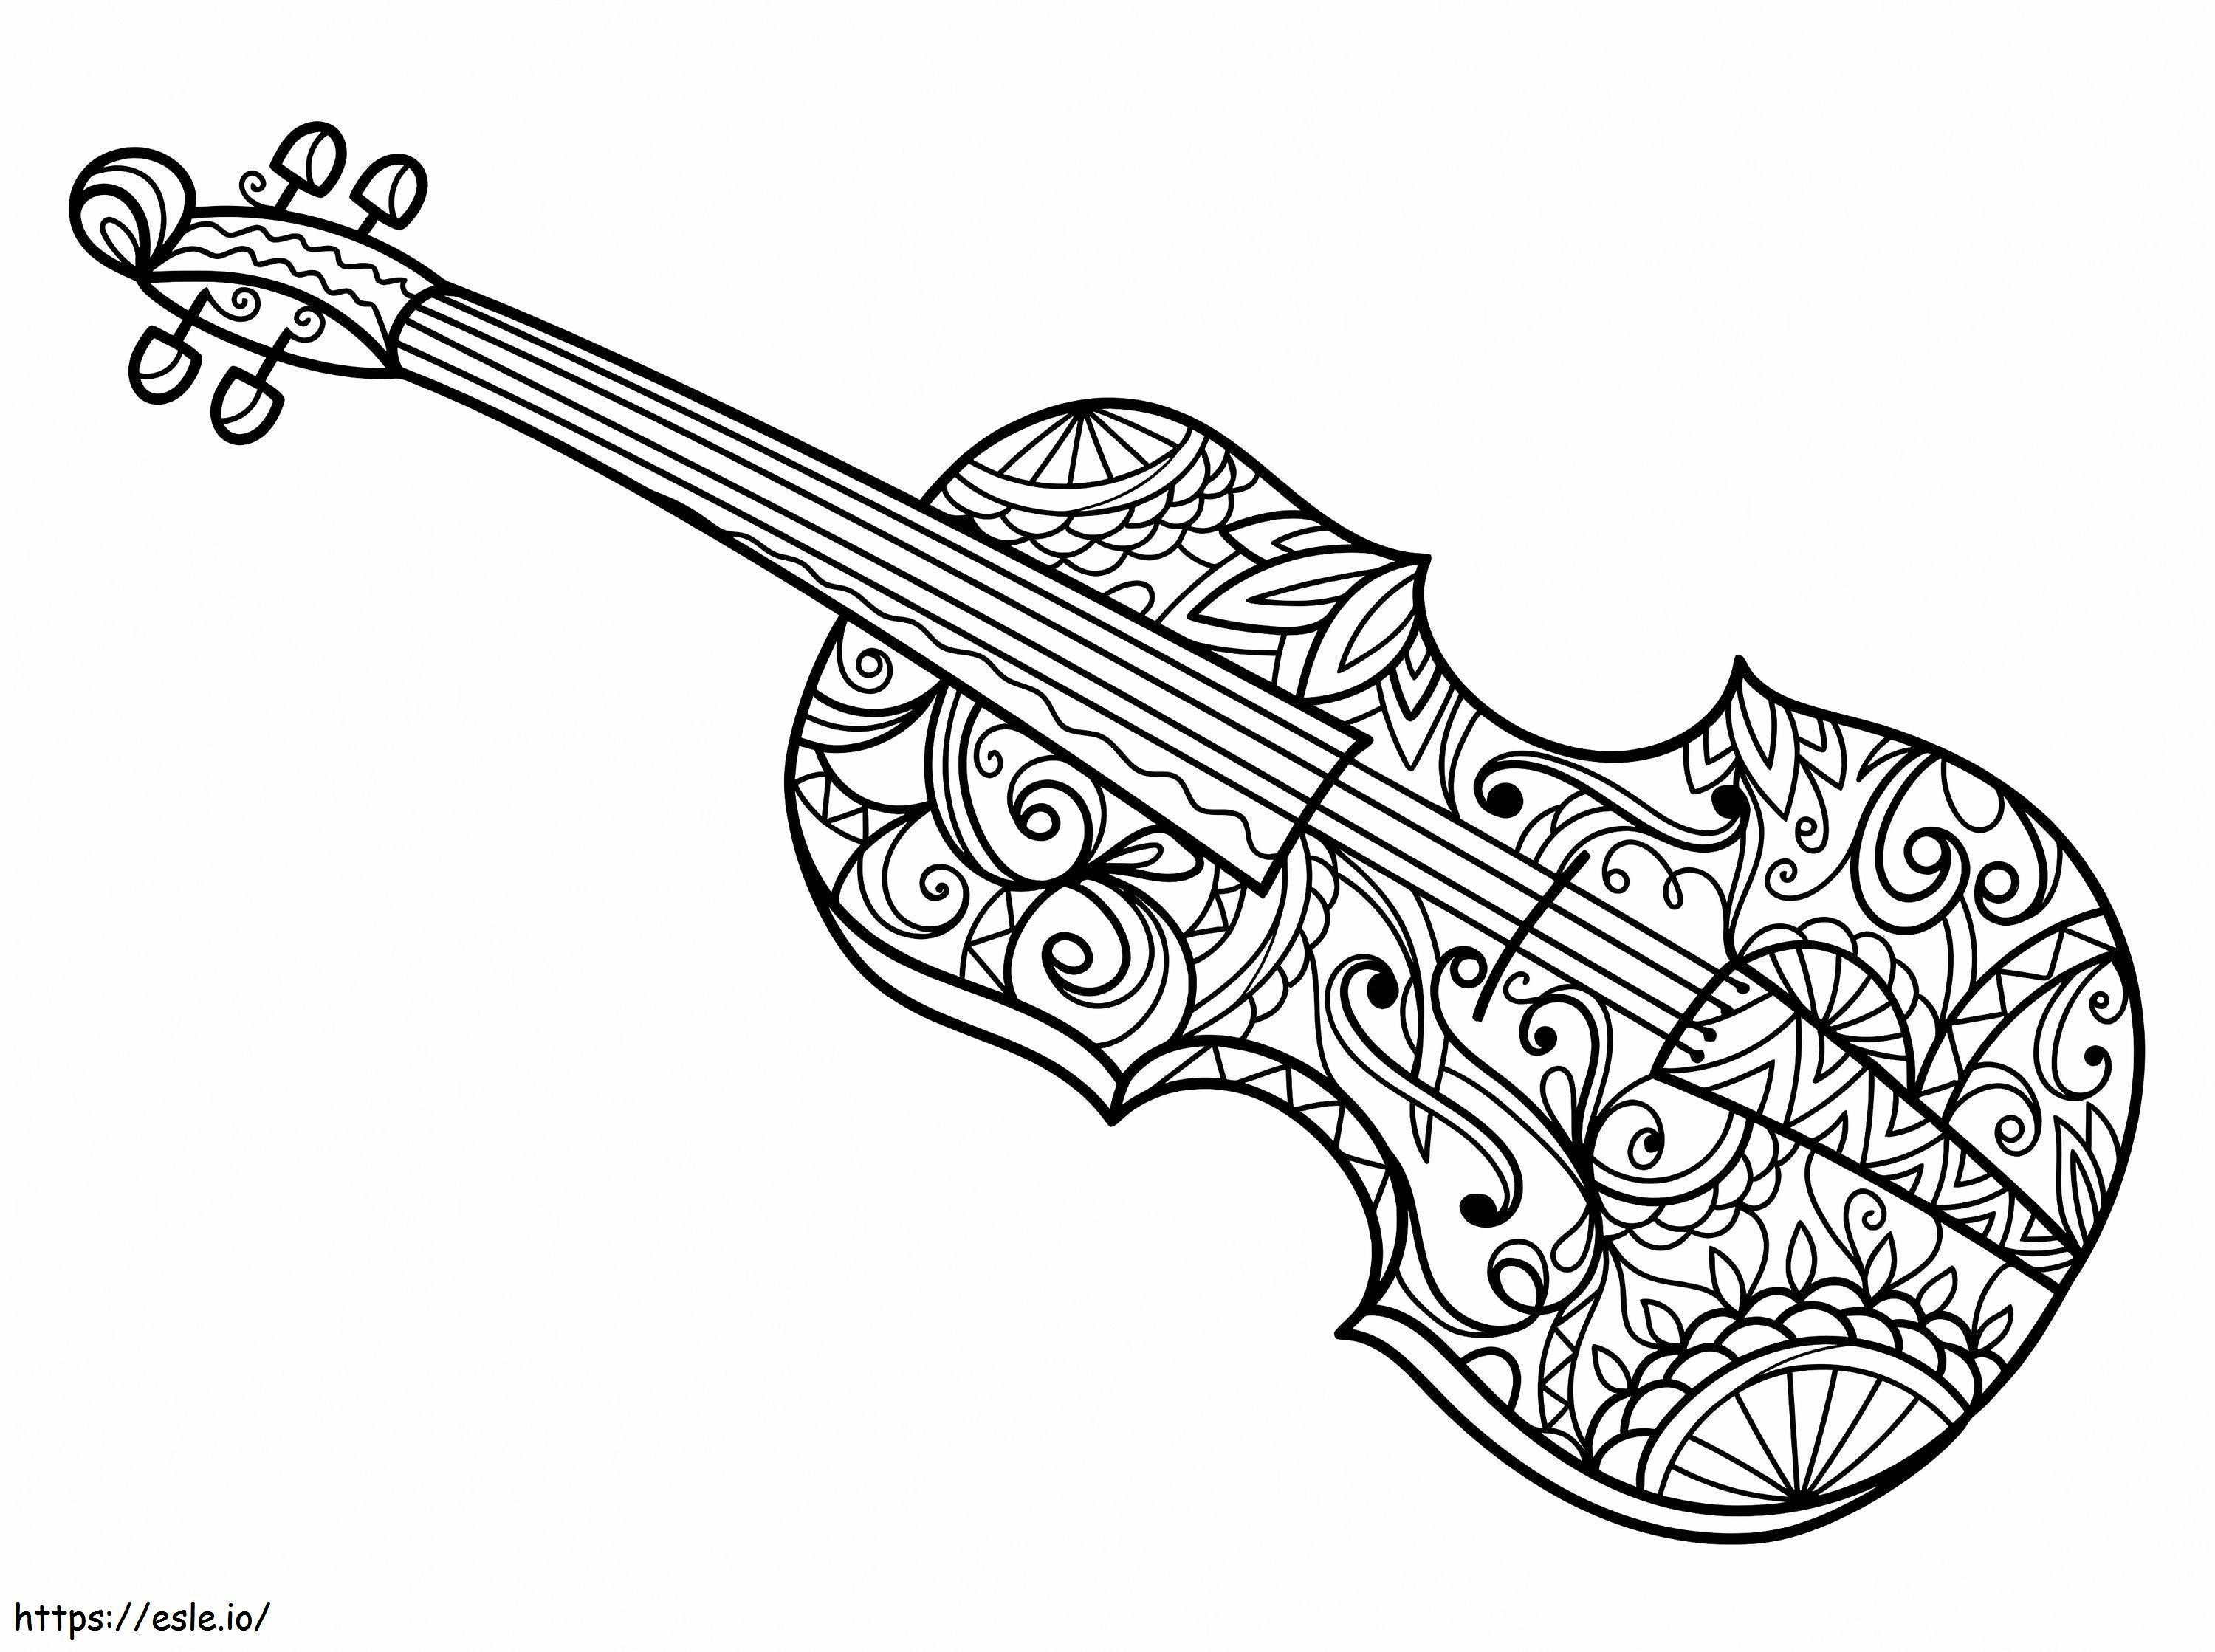 The Violin Is For Adults coloring page